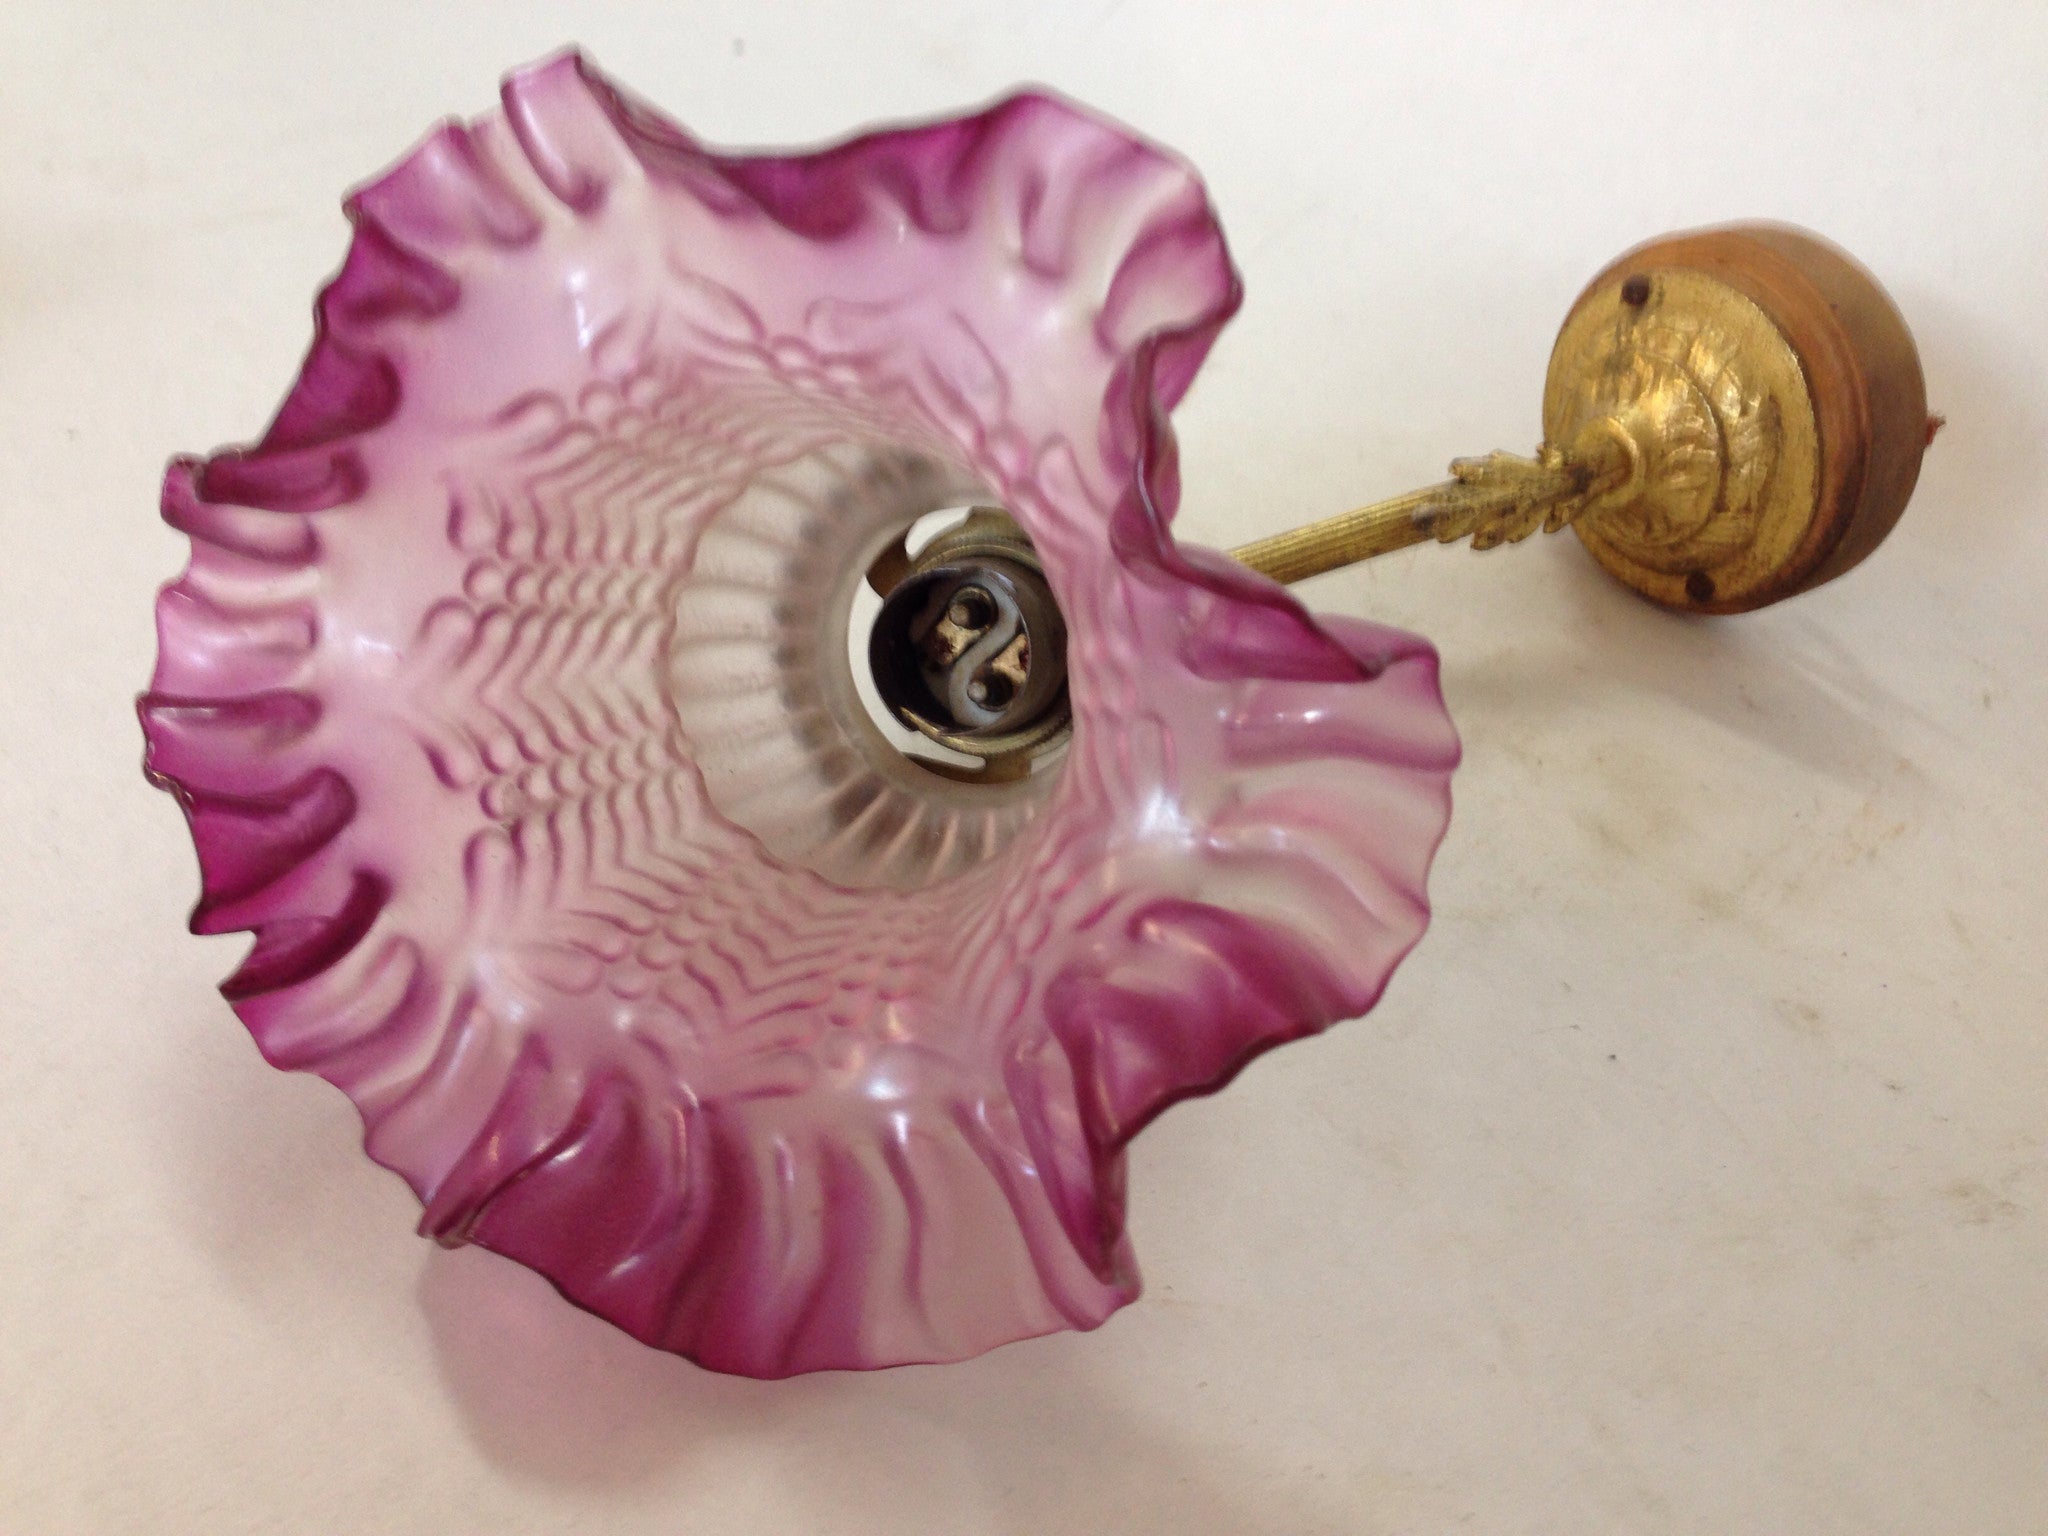 1900's Swan neck Wall sconce with purple glass shade